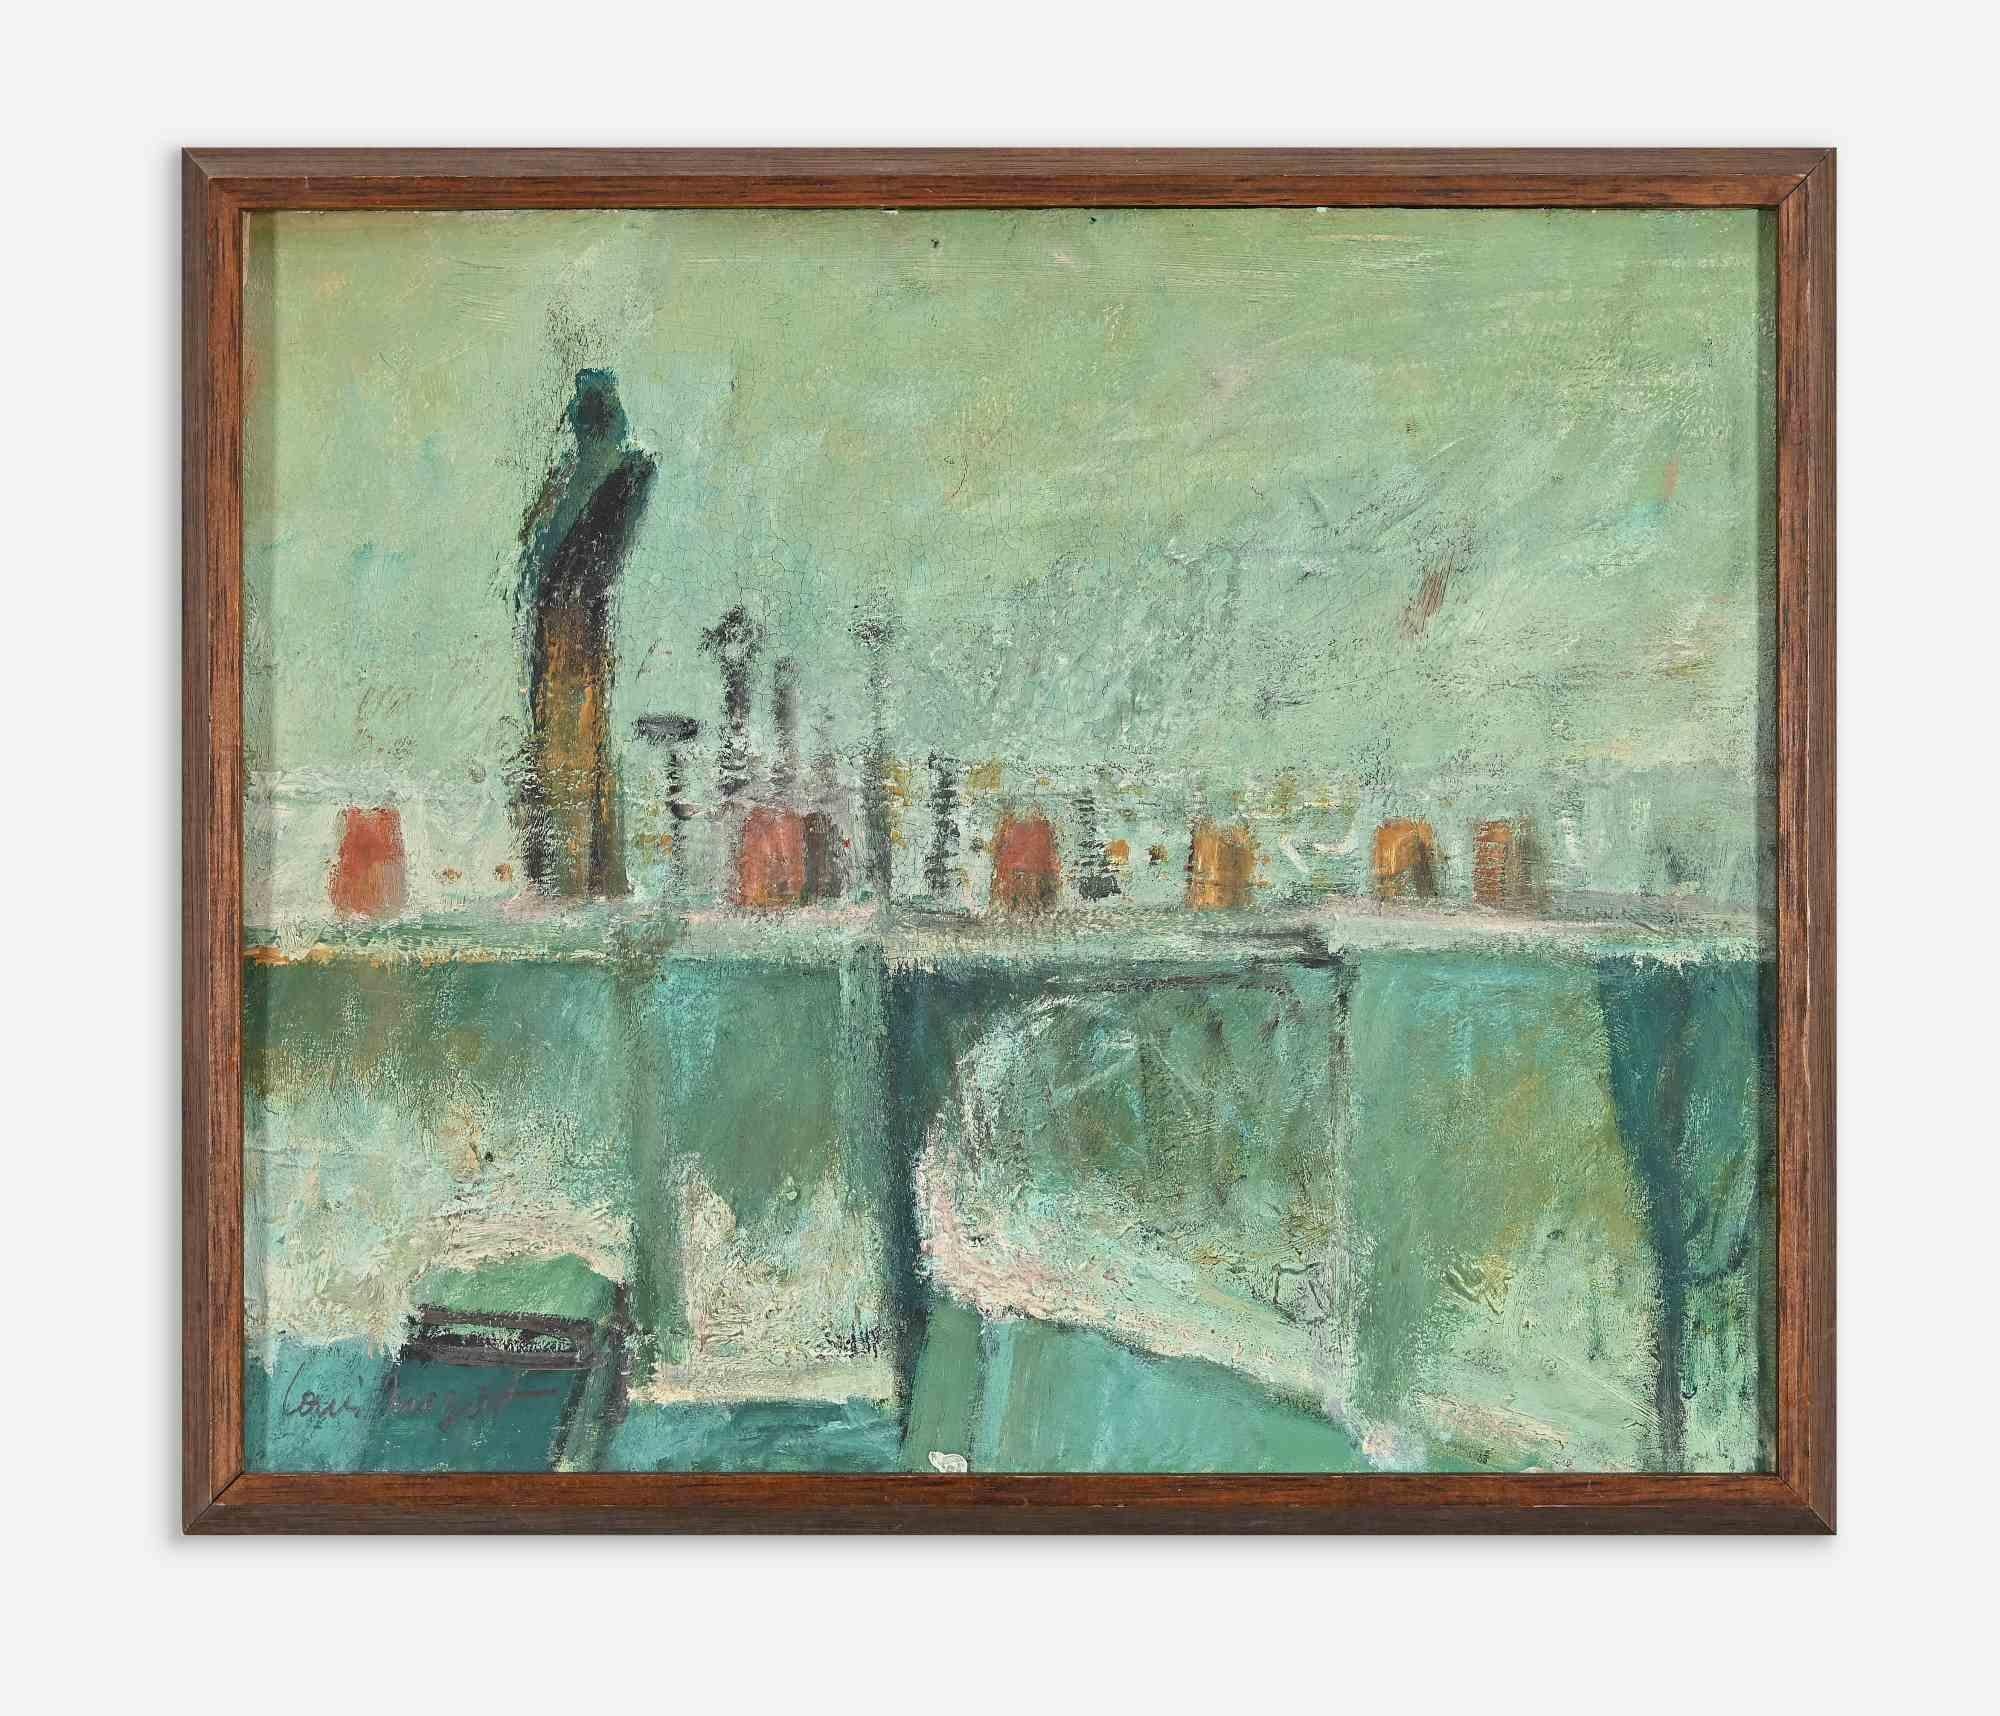 City view is an original modern artwork realized by Louis Mazot in the late 20th Century.

Mixed media on board.

Hand signed on the lower margin.

Includes frame 28 x 33 cm

Fair conditions.

Louis Mazot (1919 - 1994) was a French Artist. His work